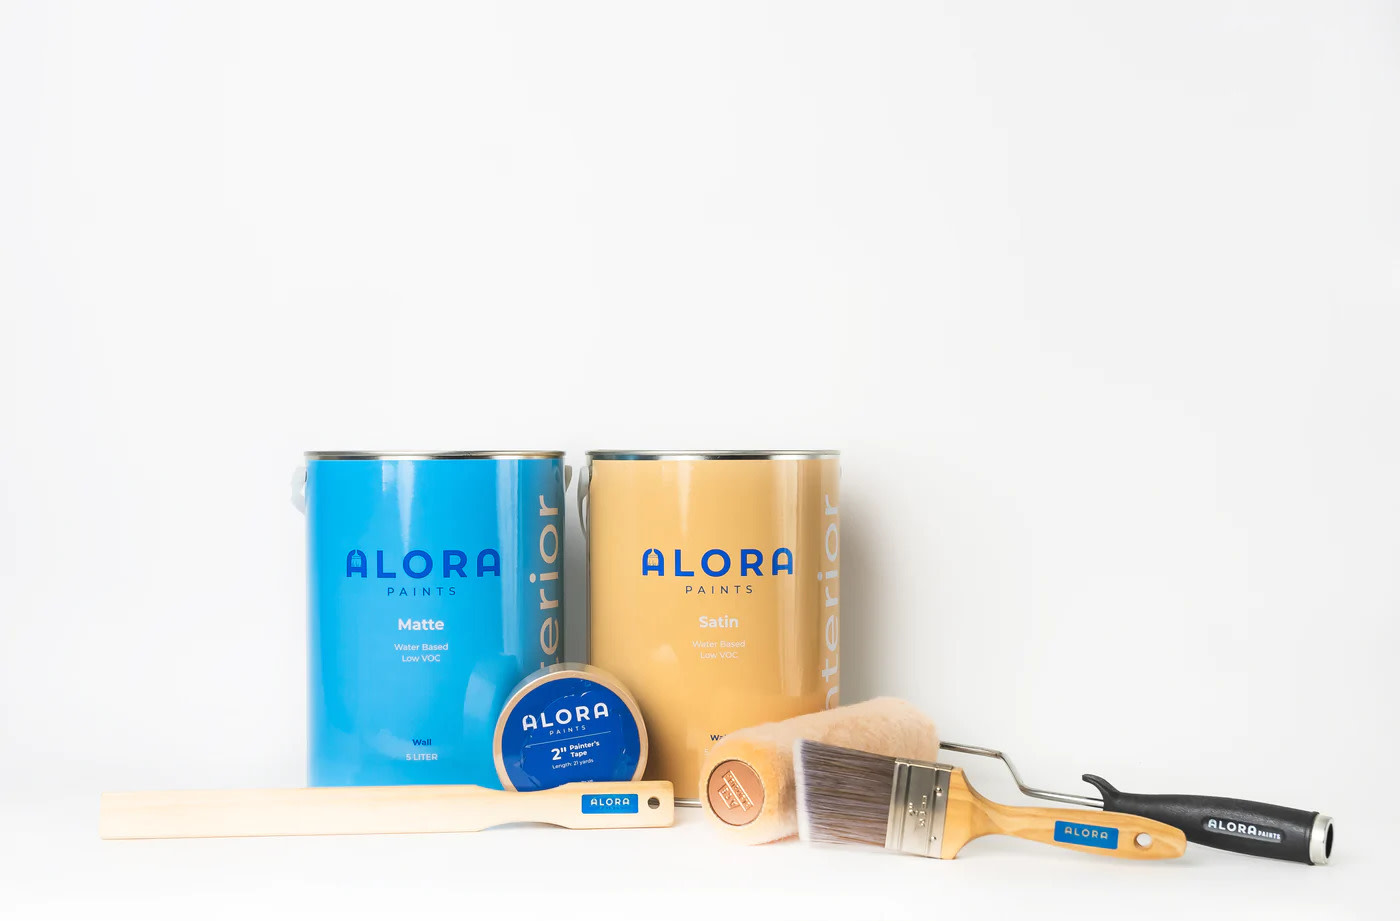 Alora is Singapore's First Carbon Neutral Certified Paint Company